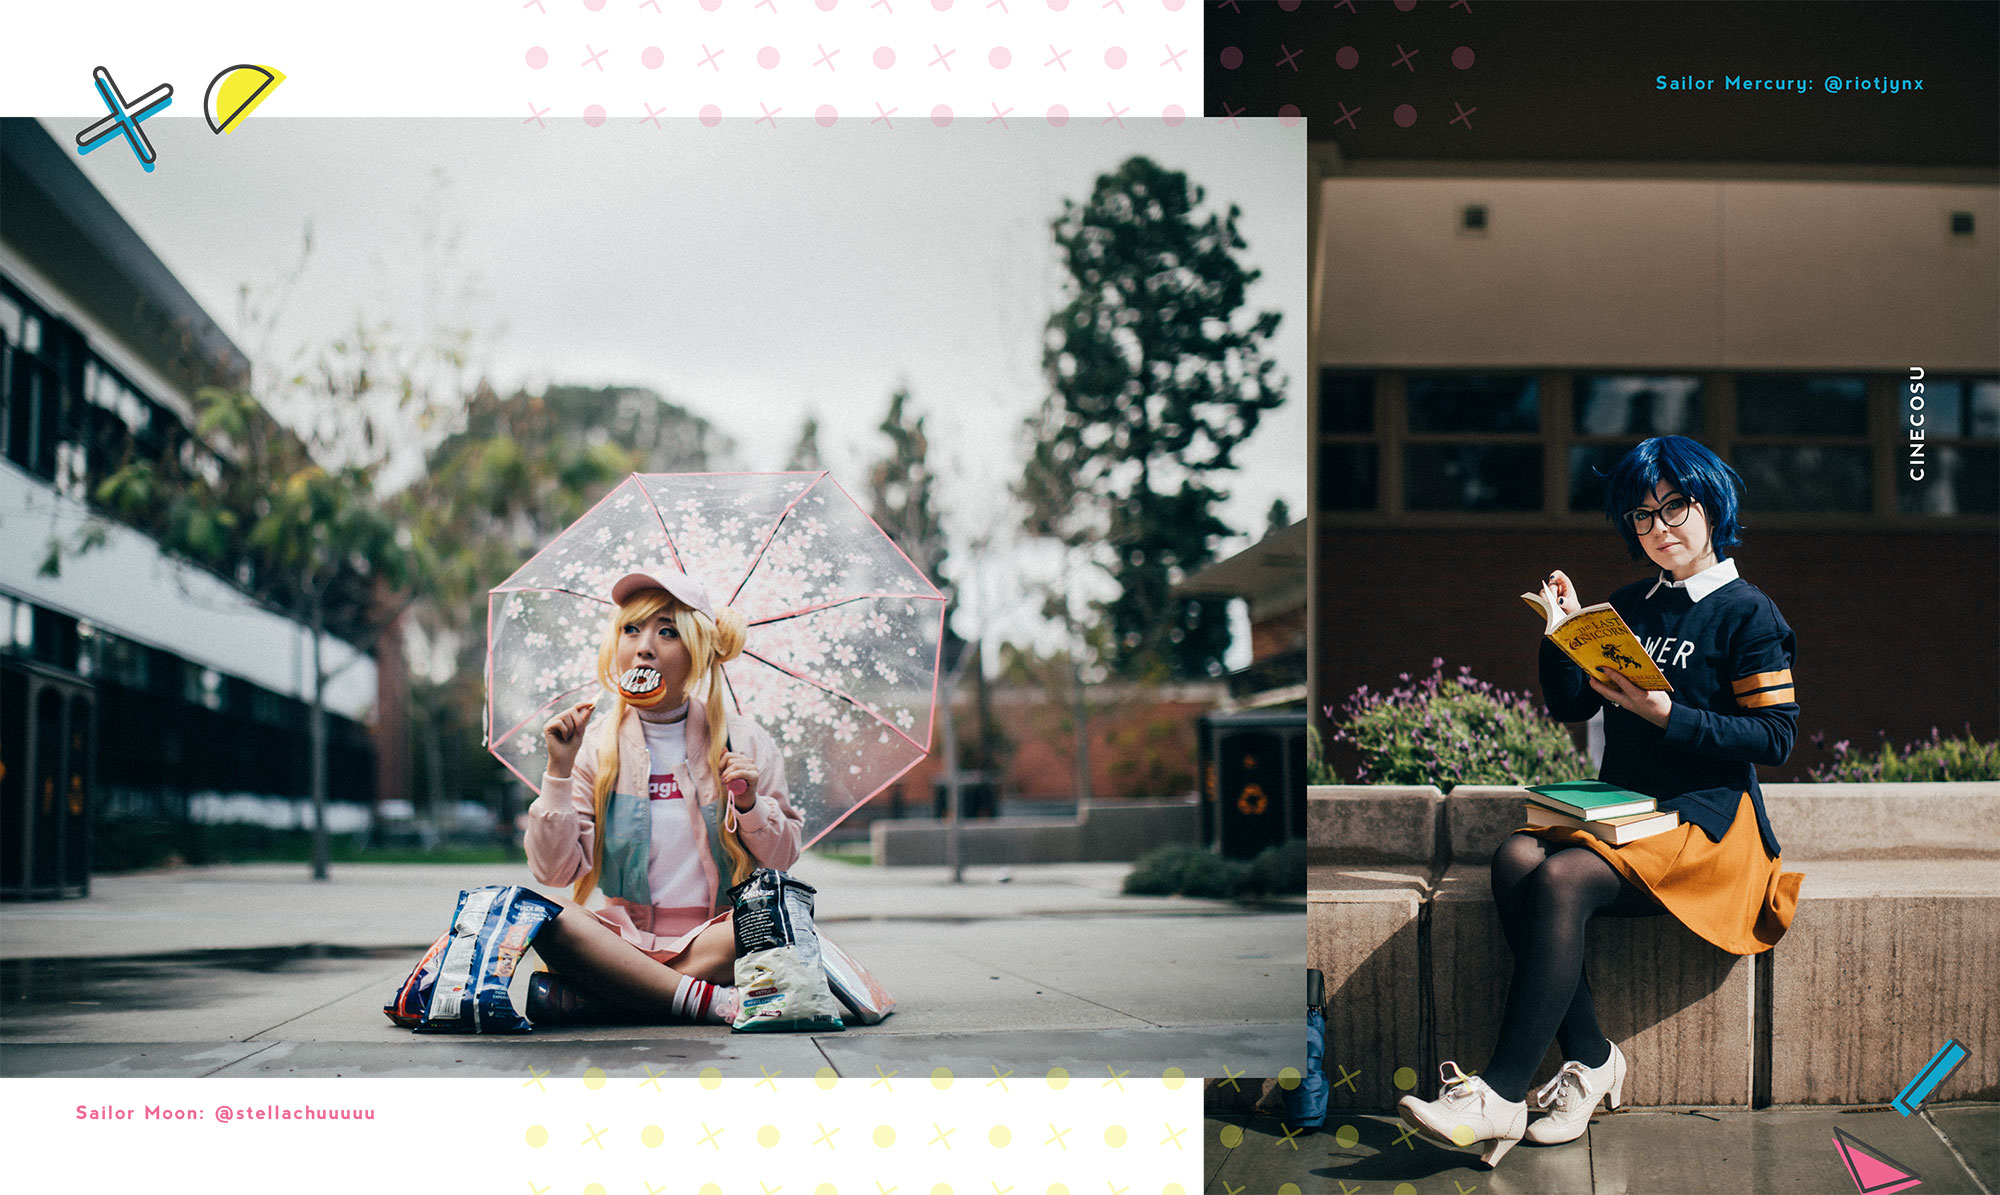 Sailor Moon Cosplay Is The Height Of ’90s Fashion